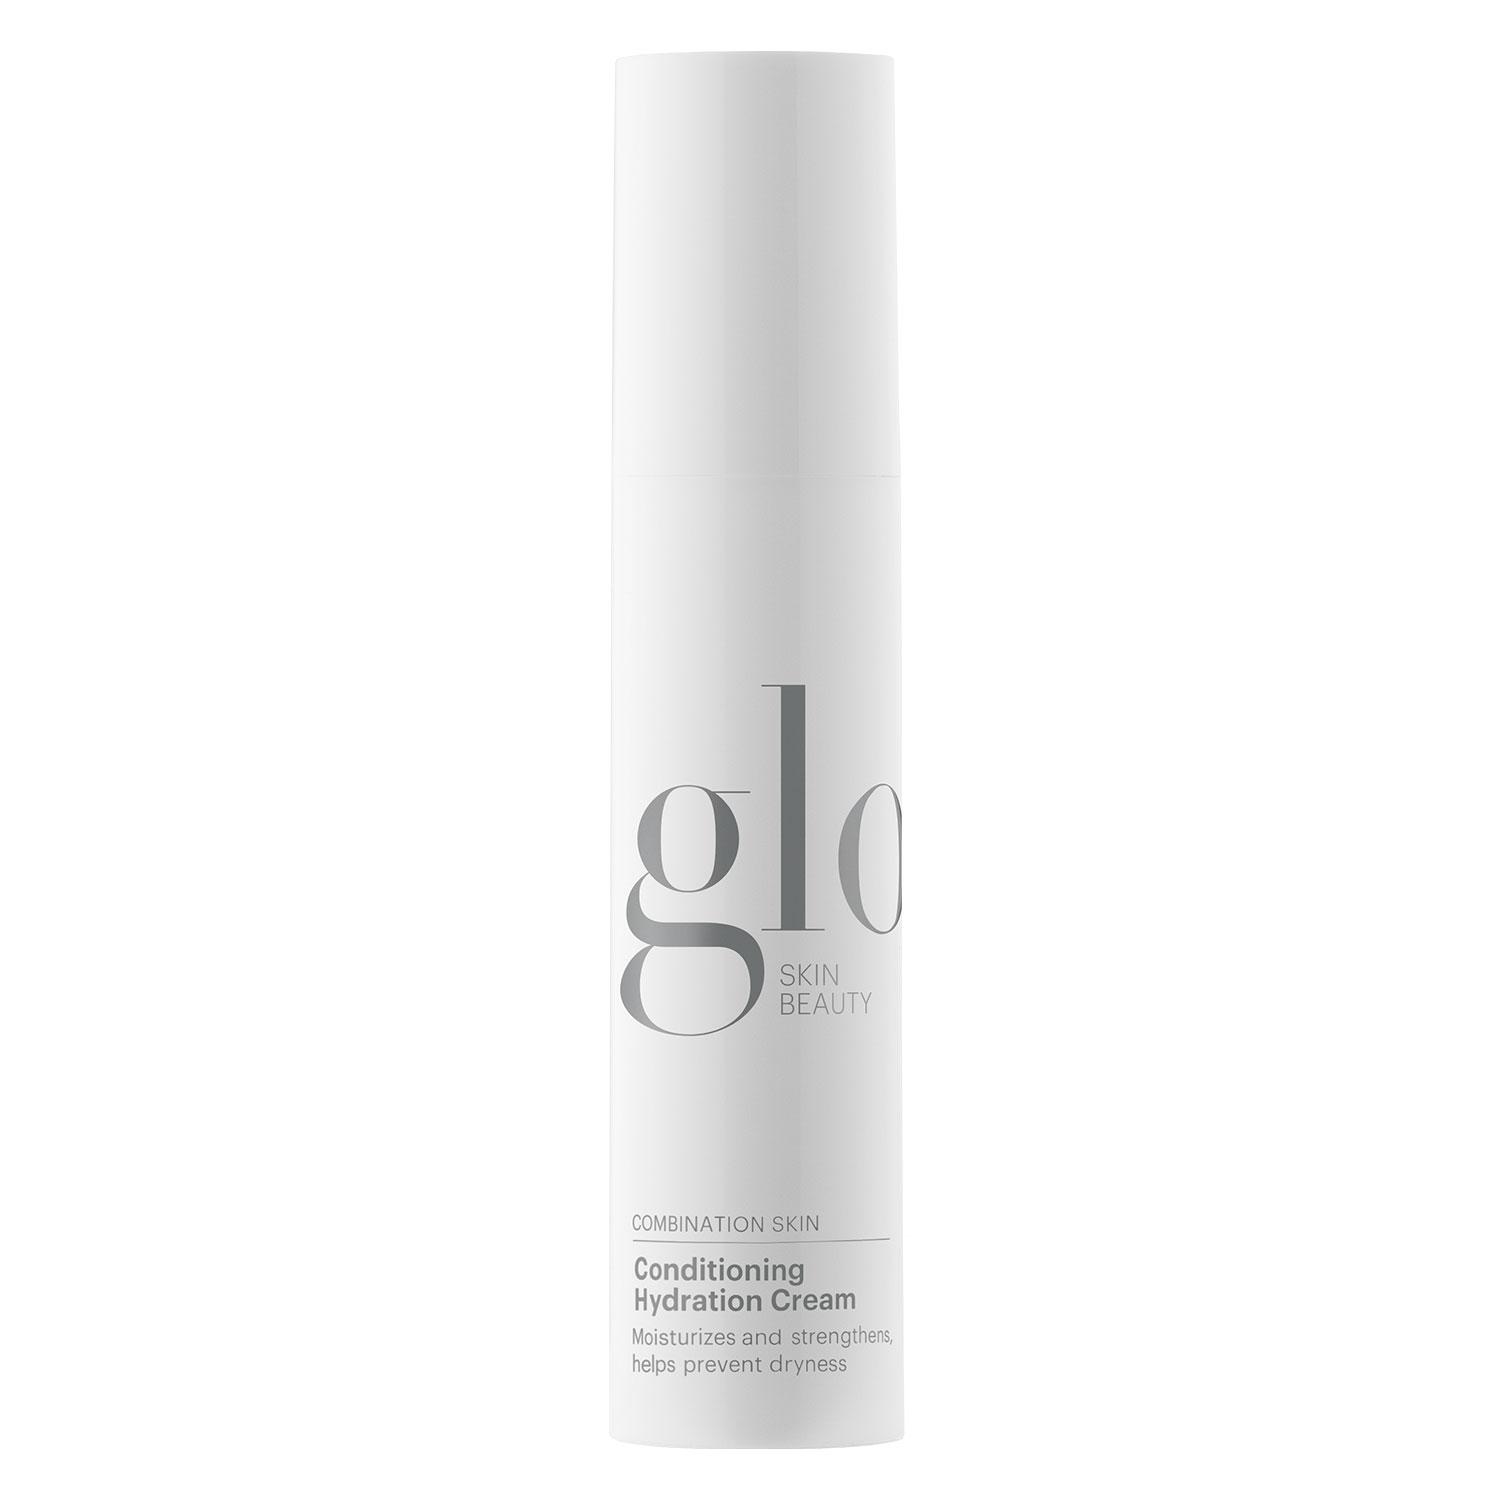 Glo Skin Beauty Care - Conditioning Hydration Cream